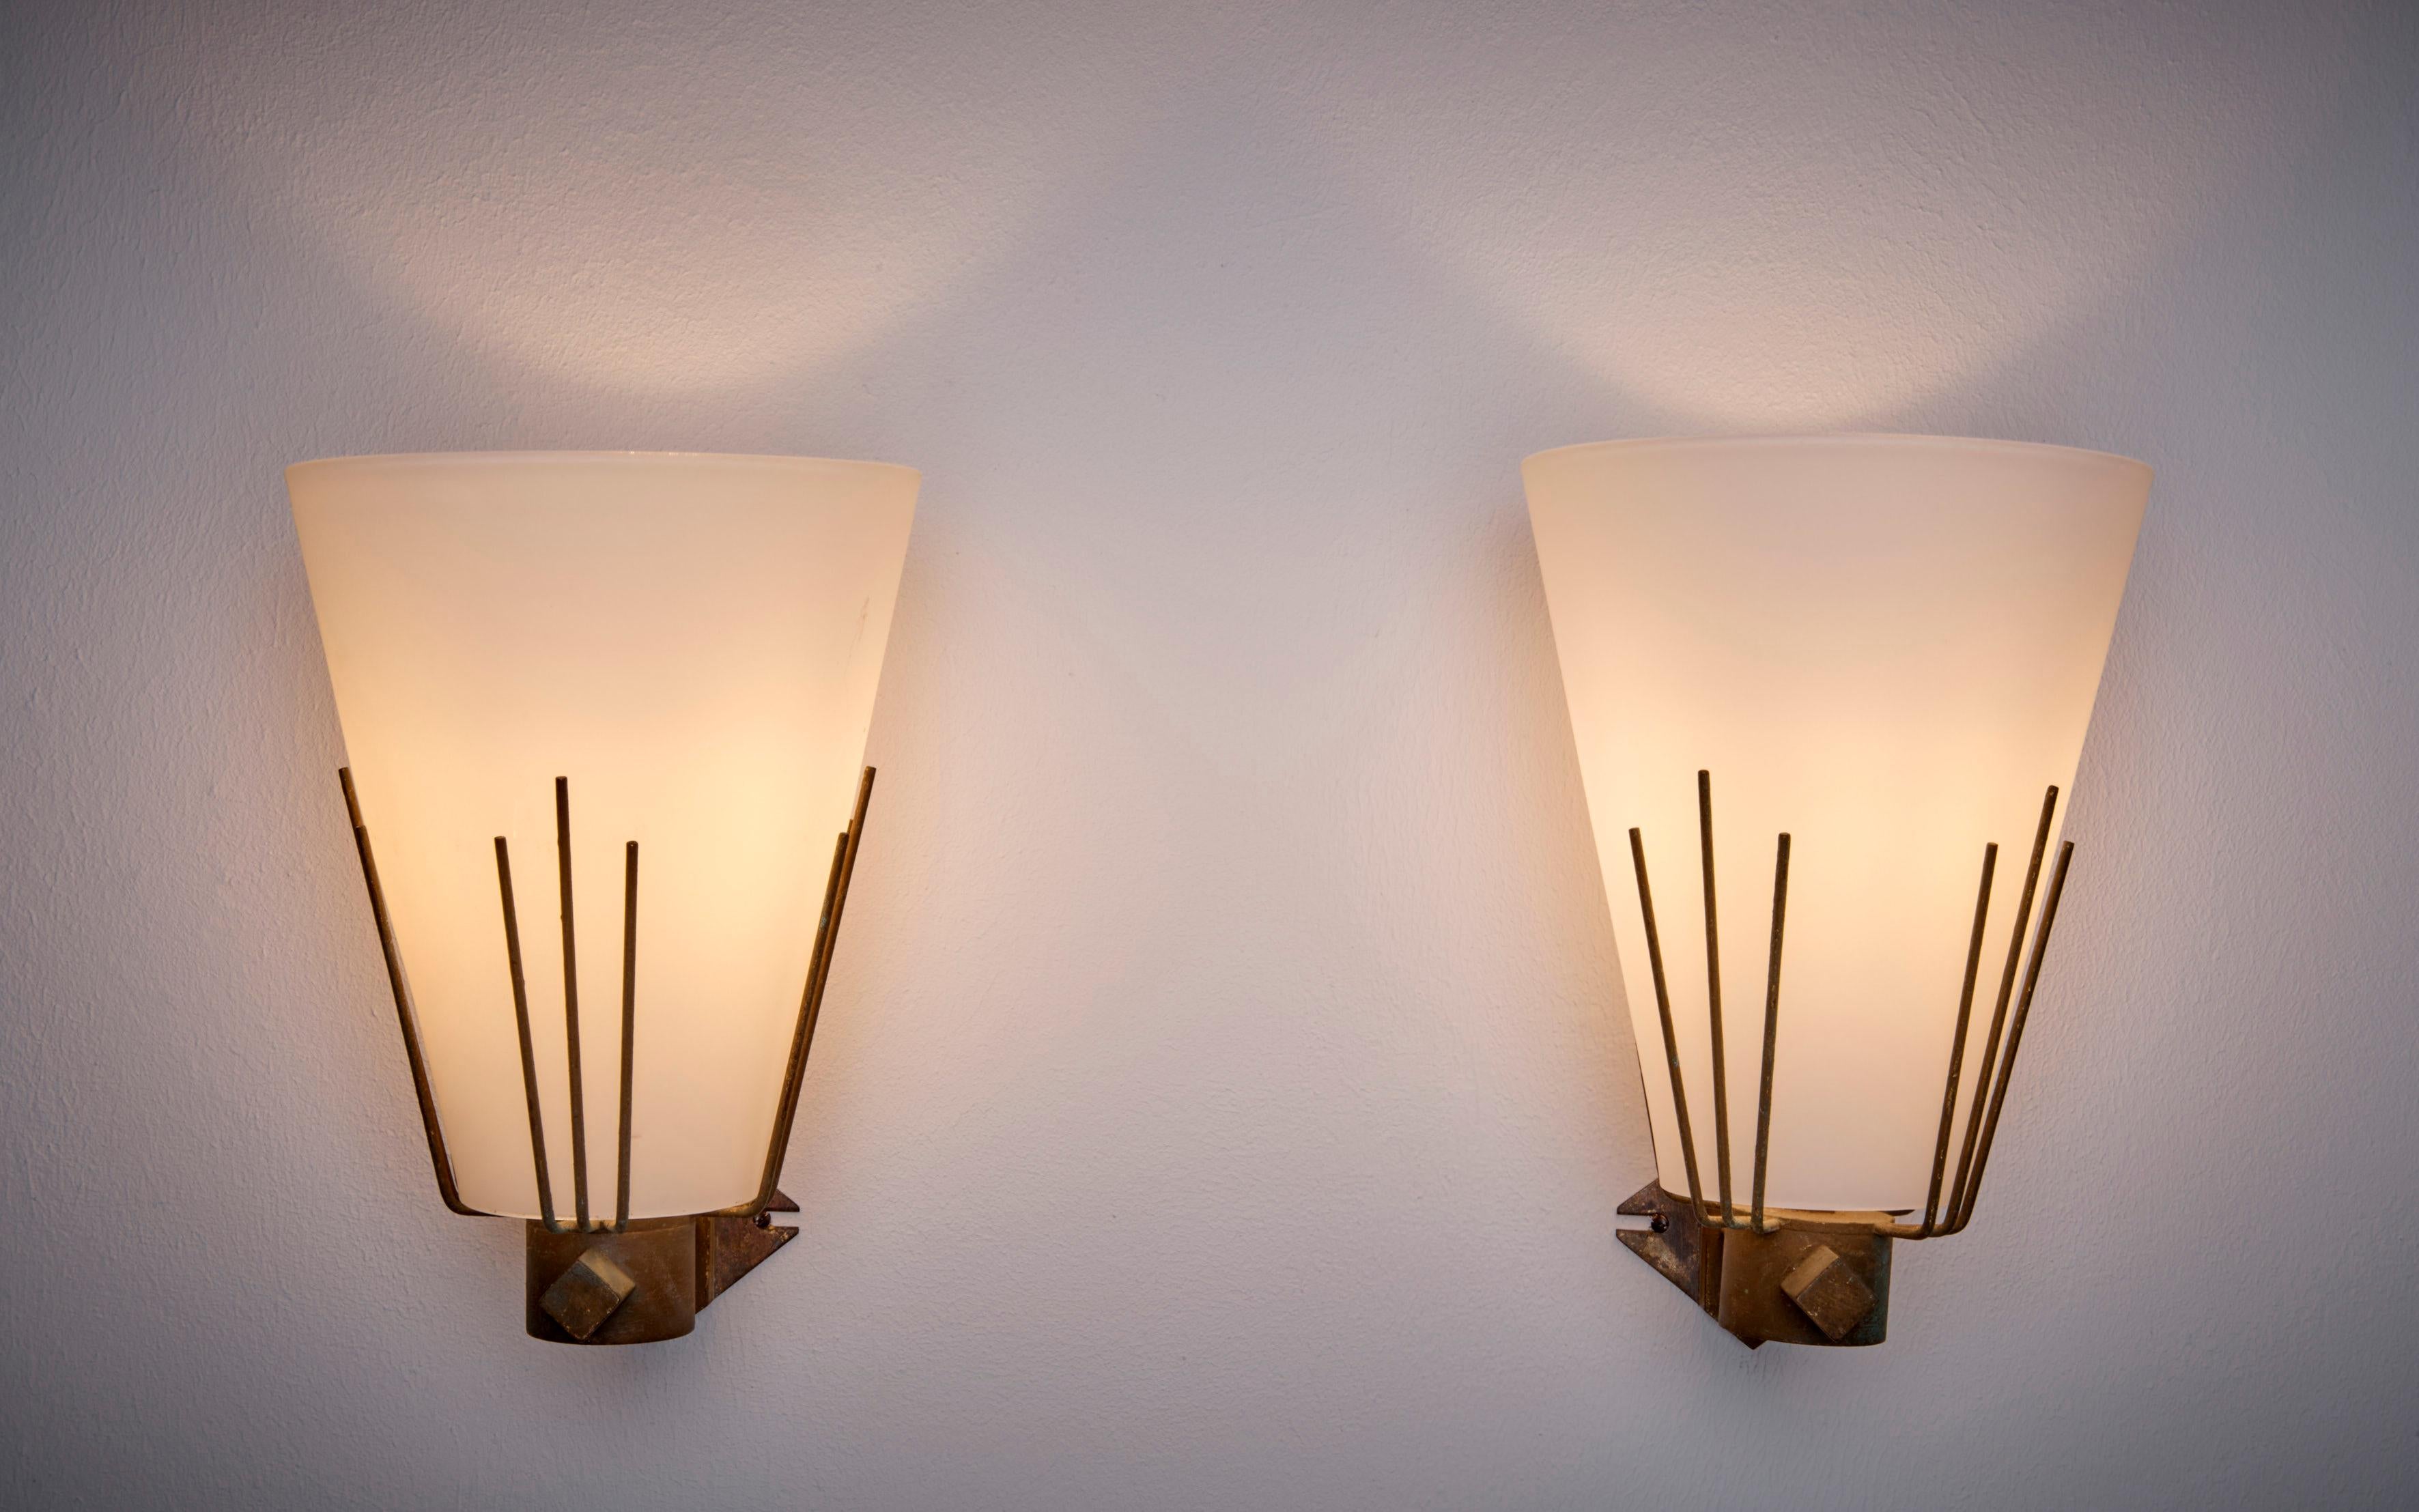 Mid-Century Modern 1 of 2 Pair of Wall Lamps in Glass and Brass